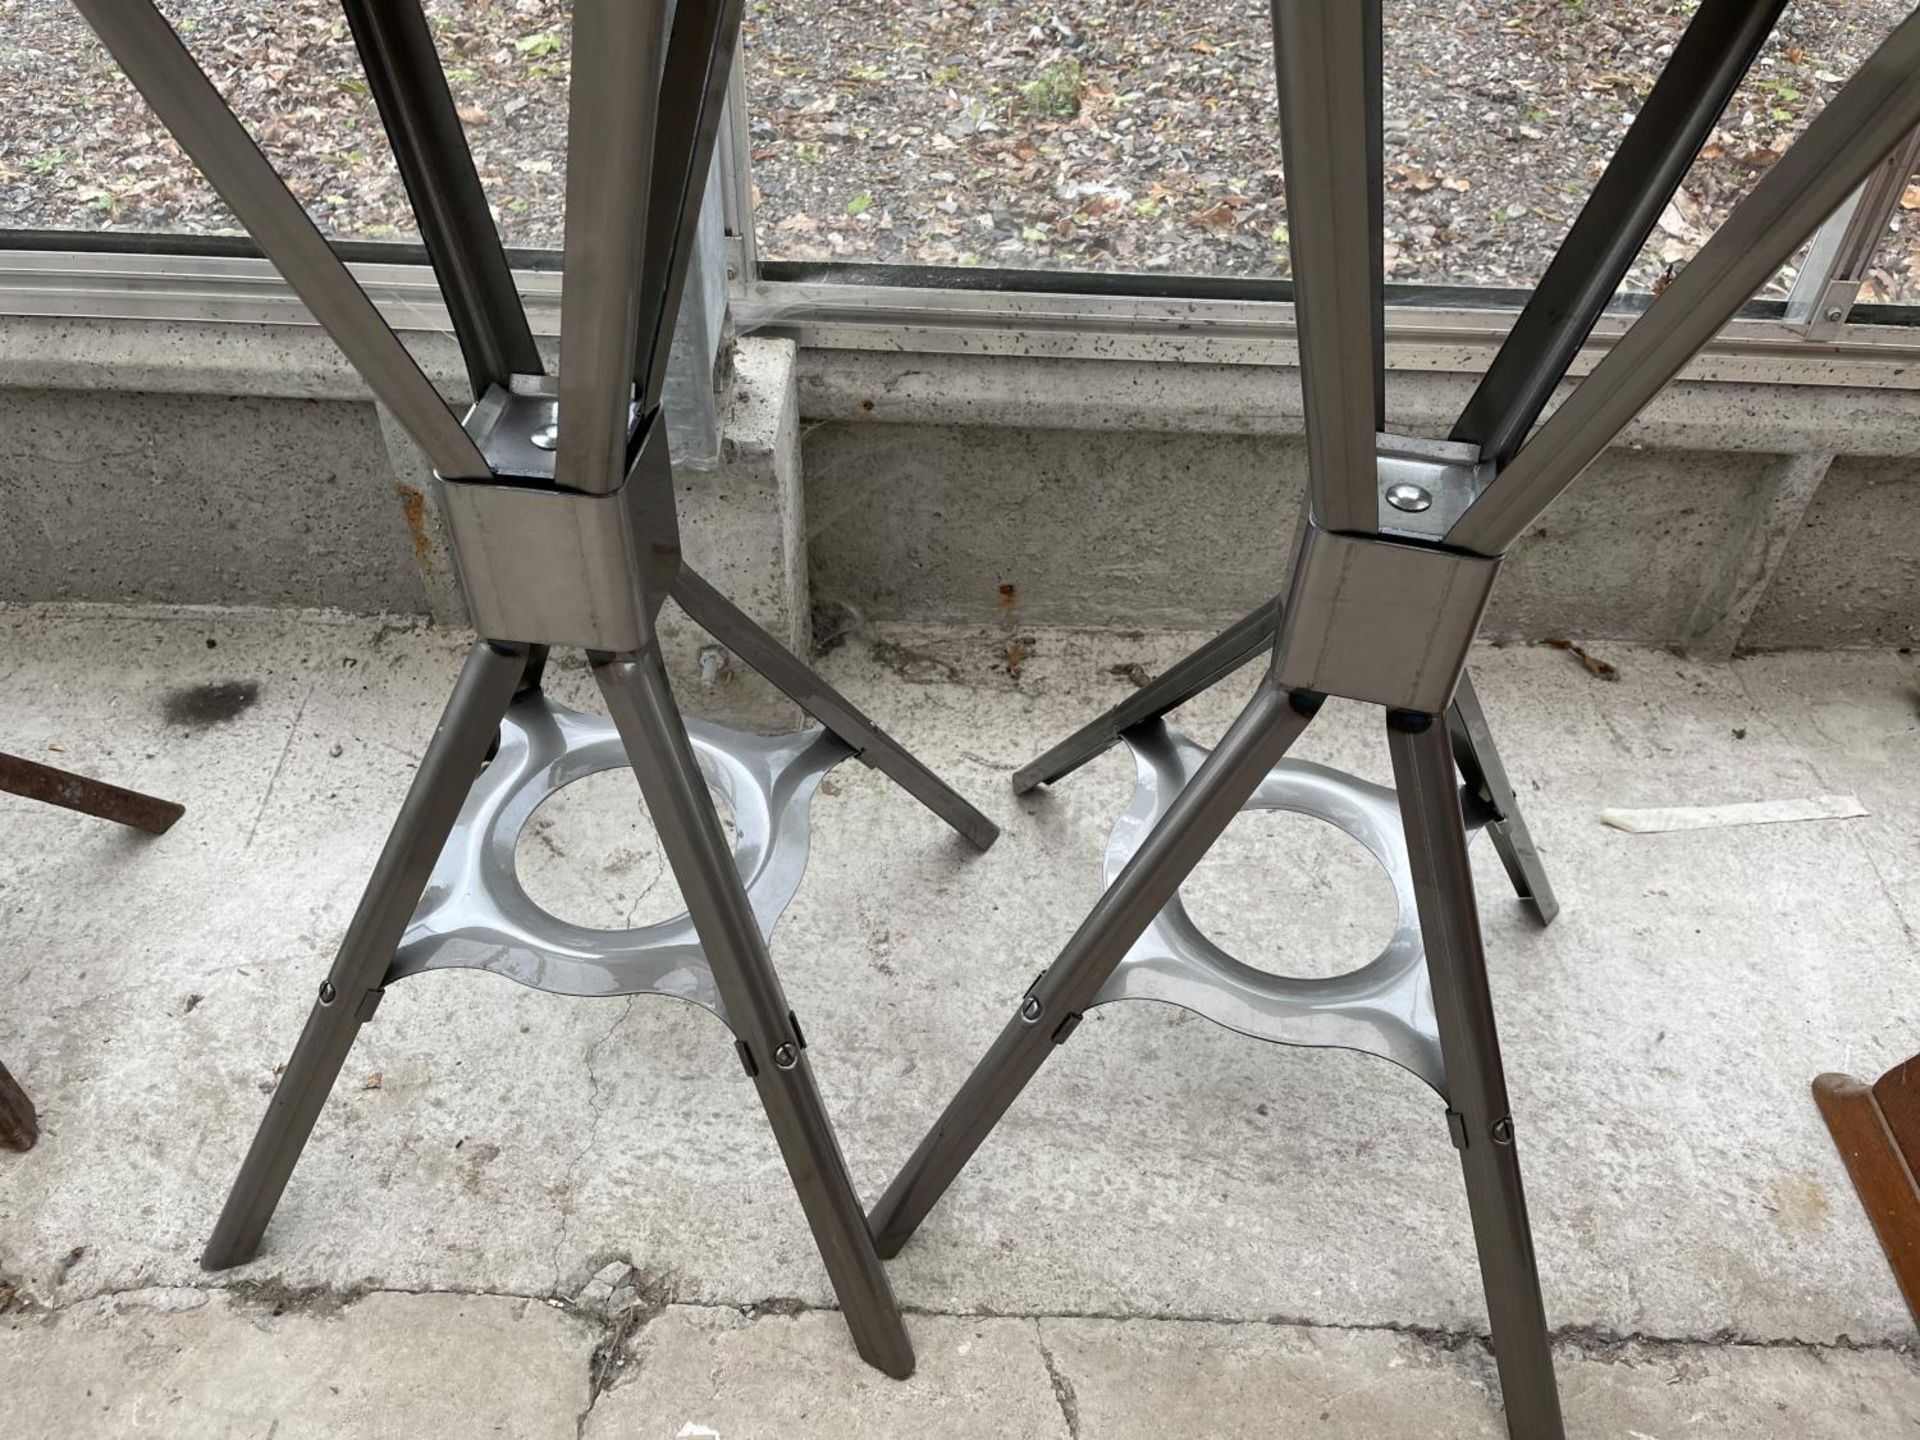 A PAIR OF INDUSTRIAL STYLE STOOLS, 30" HIGH - Image 3 of 3